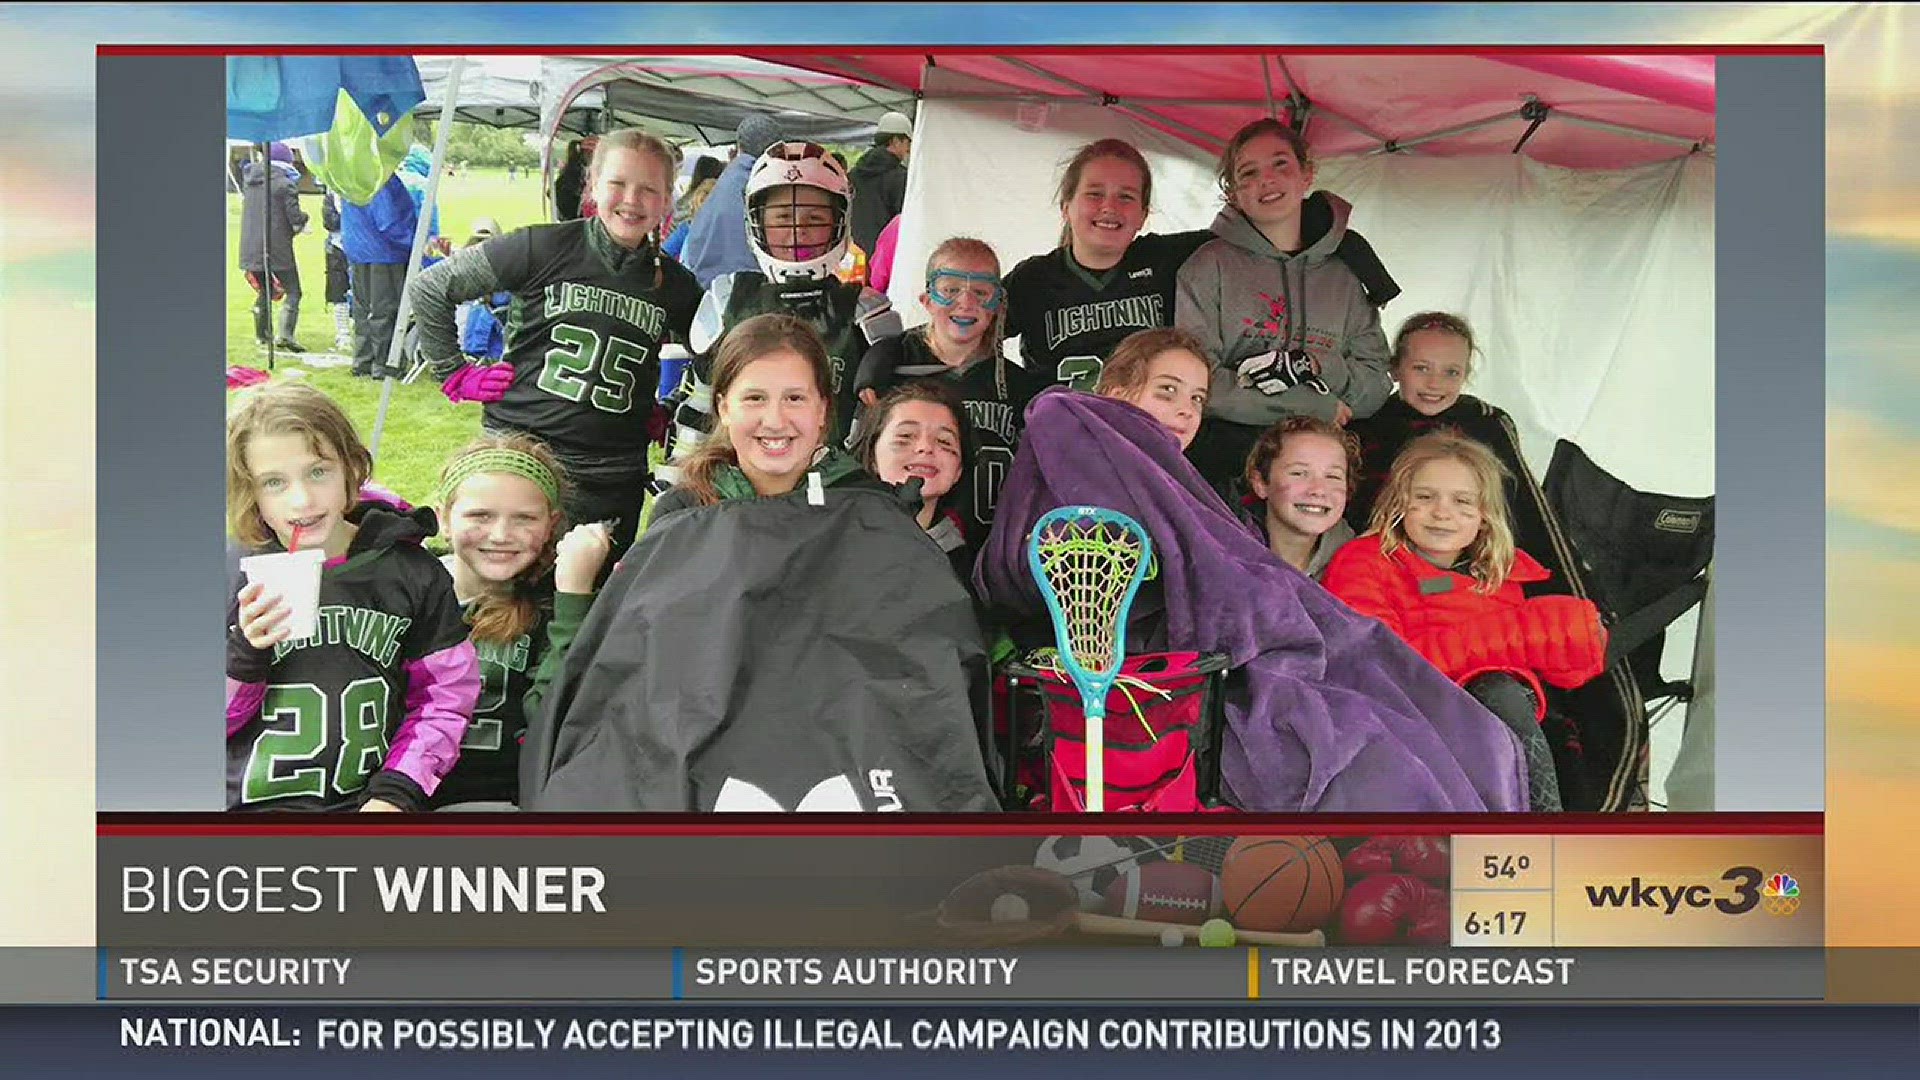 The "Biggest Winner" in local sports for May 24, 2016 is The Lake Erie Lightening Lacrosse team.